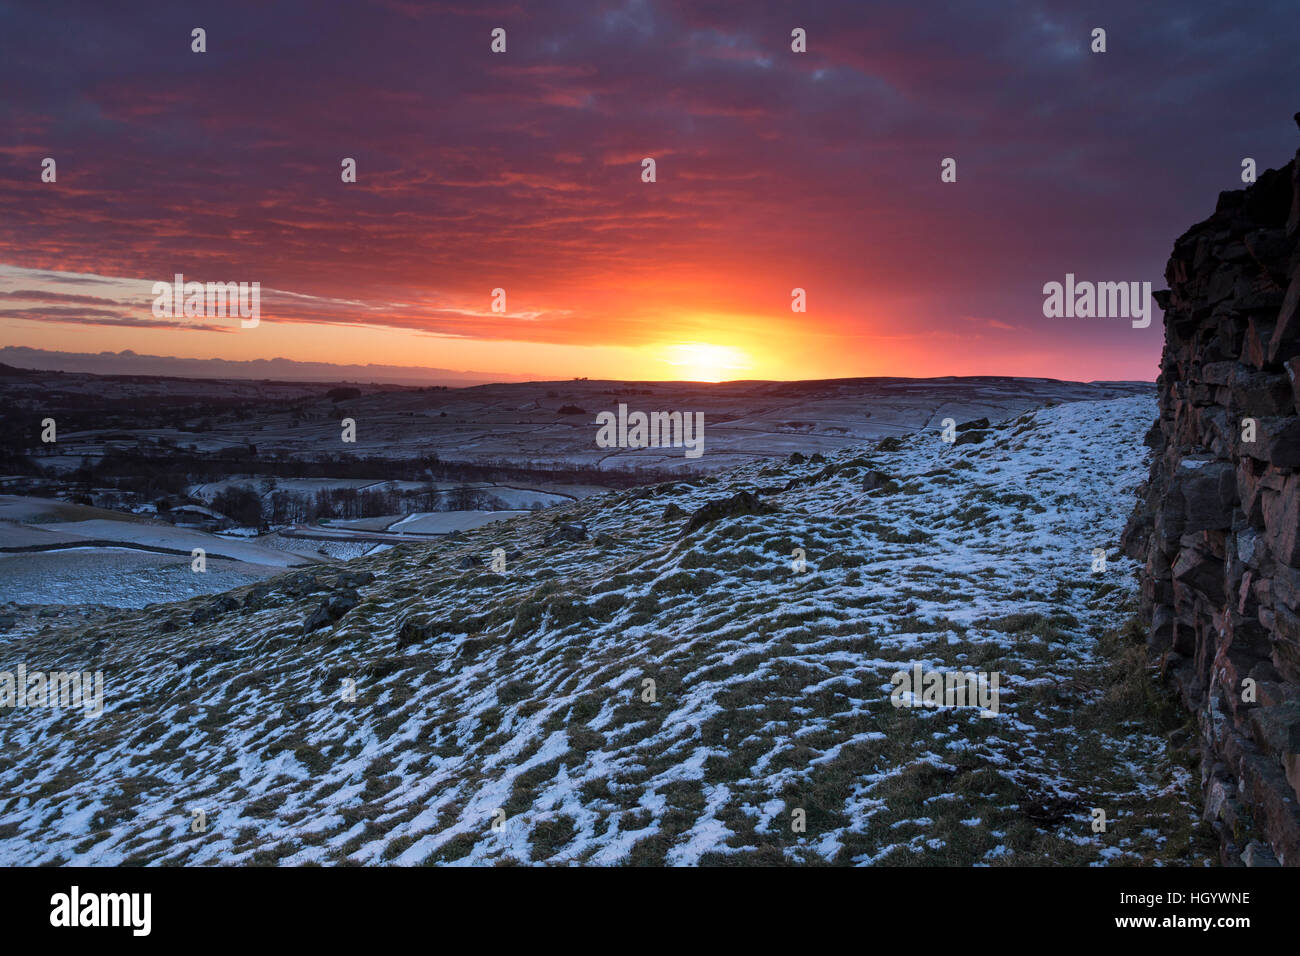 Kirkcarrion, Teesdale, County Durham UK. Saturday 14th January 2017. UK Weather.  It was a frosty and snowy start to the day as the sun rose over the North Pennine valley of Lunedale in the North East of England.  The forecast is for a dry day, although cloud will thicken later this evening to bring outbreaks of rain overnight.  © David Forster/Alamy Live News Stock Photo